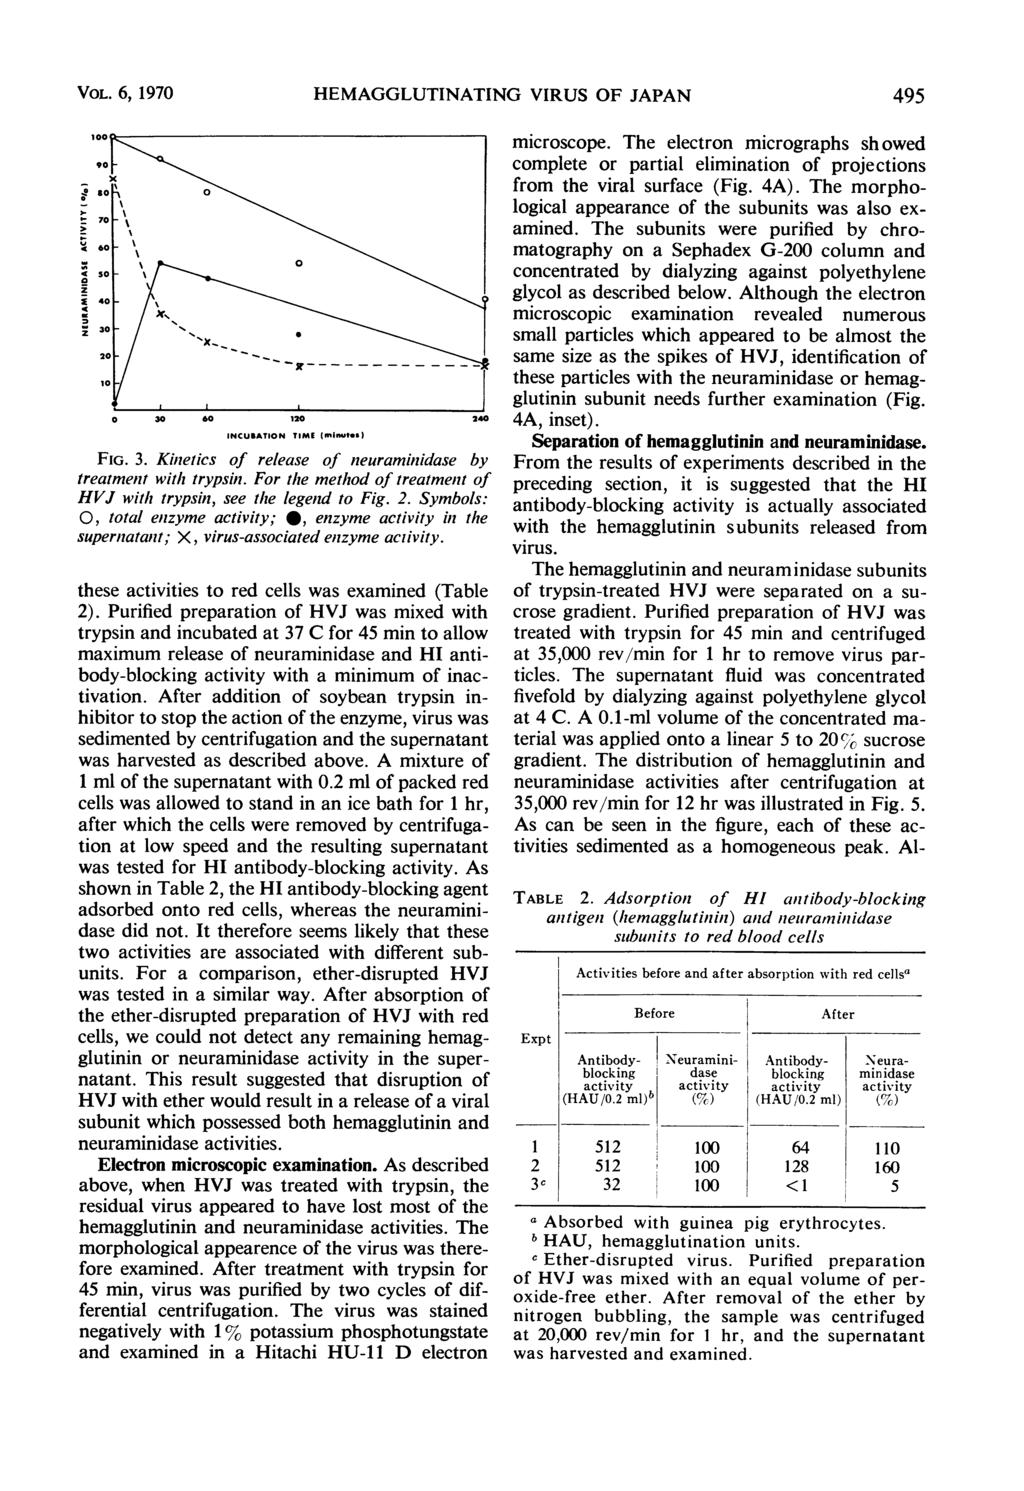 VOL. 6, 1970 HEMAGGLUTINATING VIRUS OF JAPAN 495 30 60 120 20 INCUATION TIME FIG. 3. Kinletics of release of neuraminidase by treatment withl trypsin.